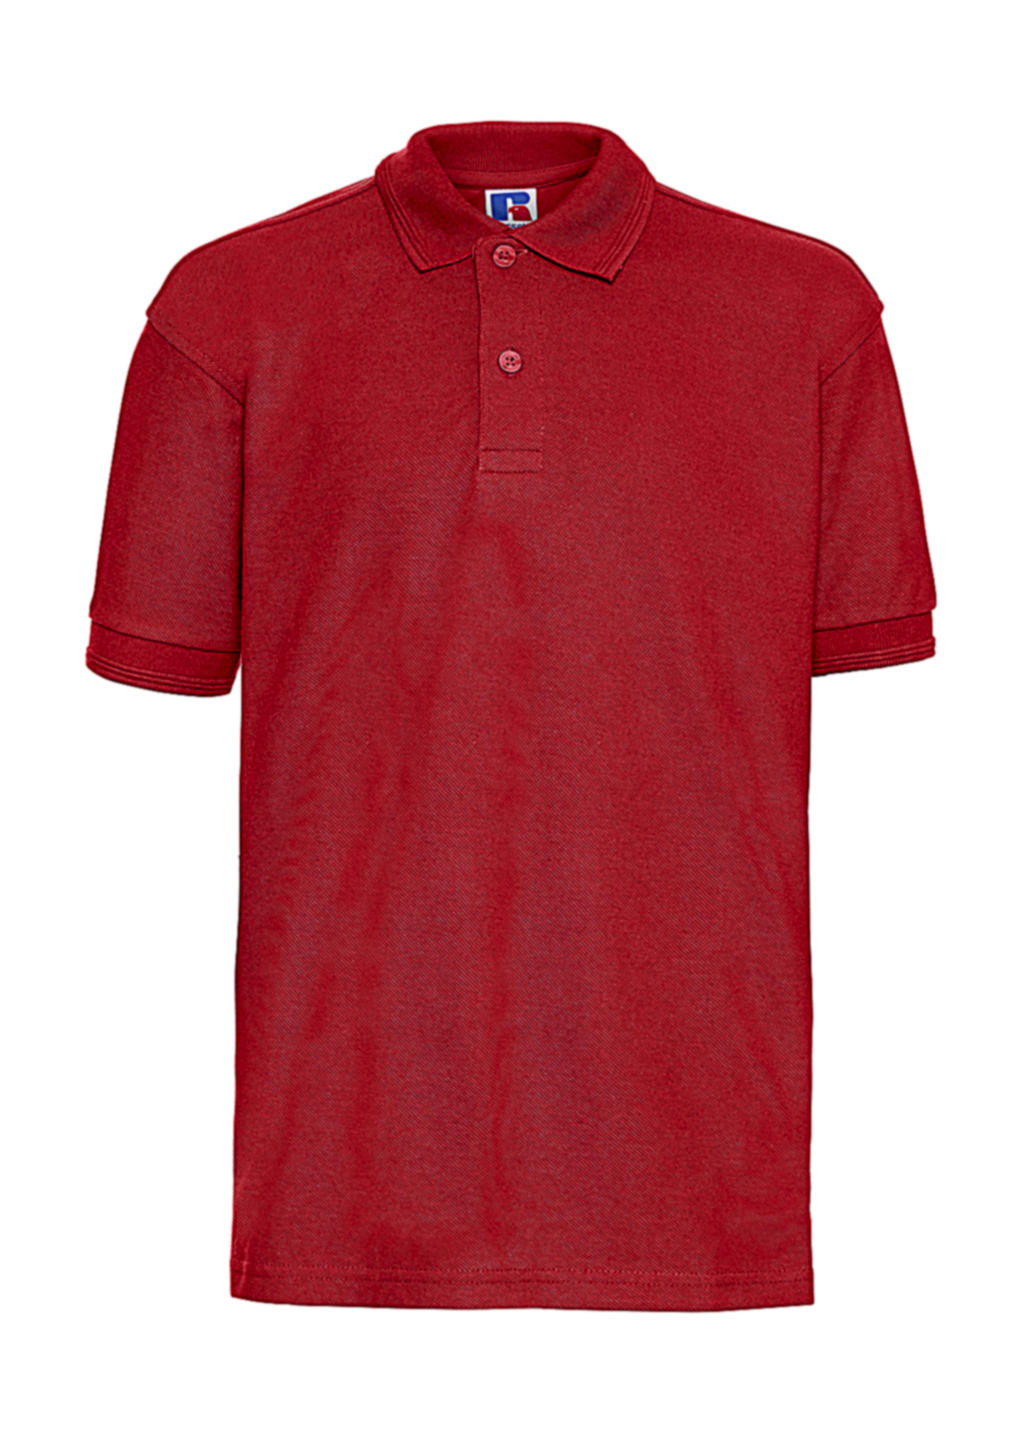  Kids Hardwearing Polycotton Polo in Farbe Bright Red